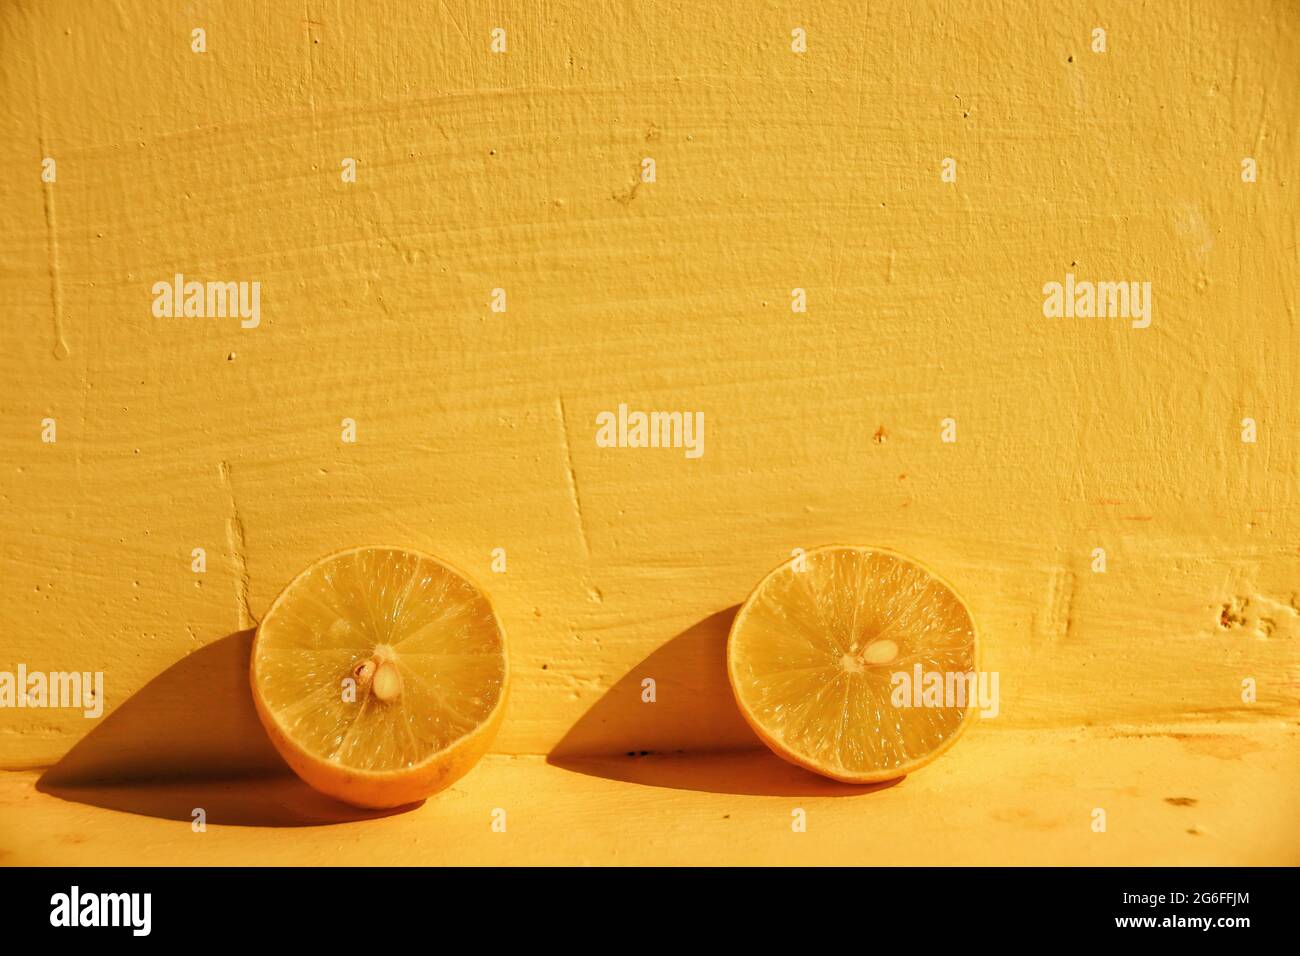 Two slices of lemons against a yellow colored wall Stock Photo